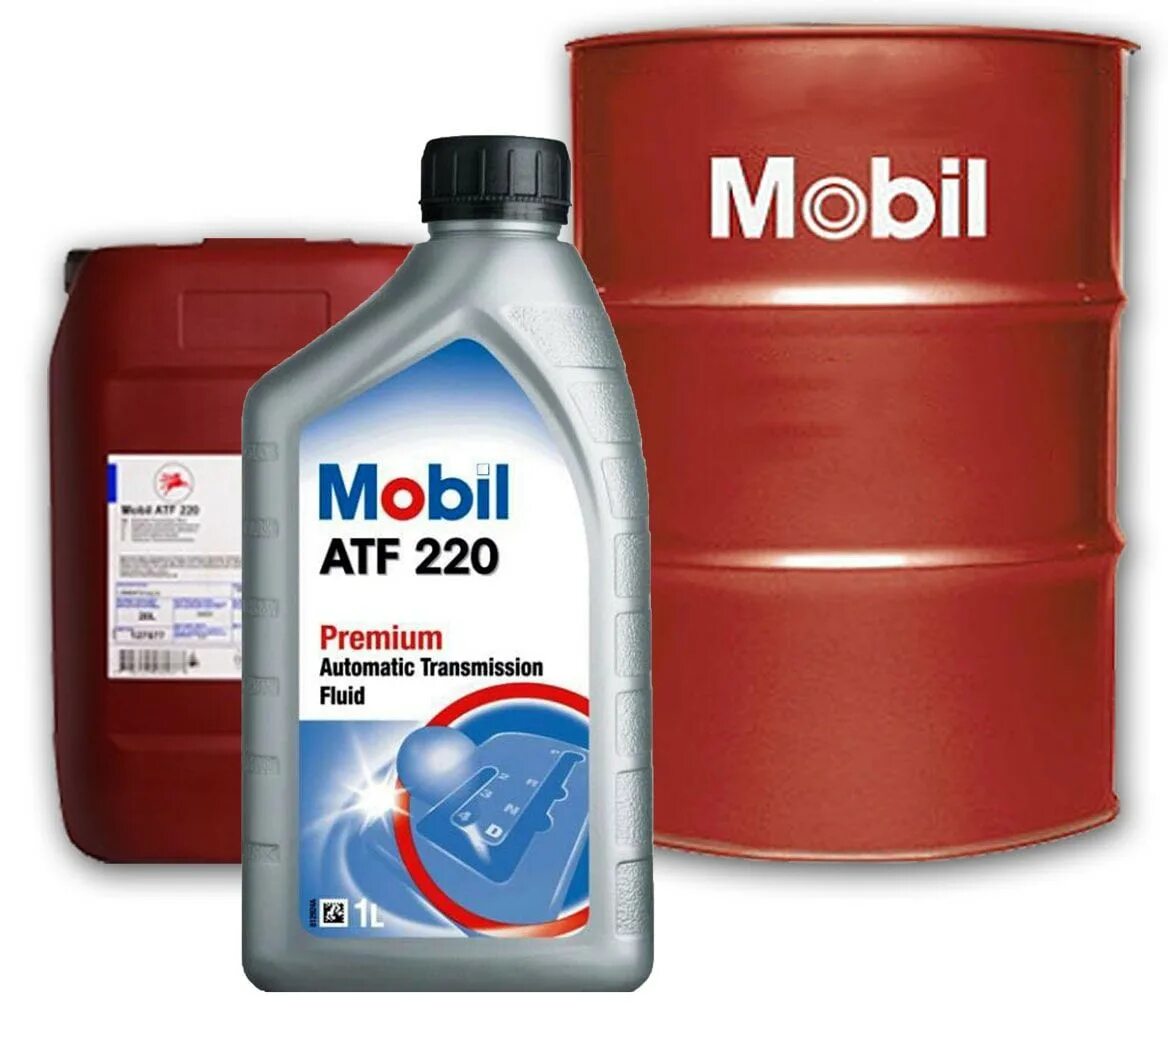 Mobil atf dexron. Масло mobil ATF 220. Mobil ATF 220 Dexron II D. Mobil ATF 200 Automatic transmission Fluid.